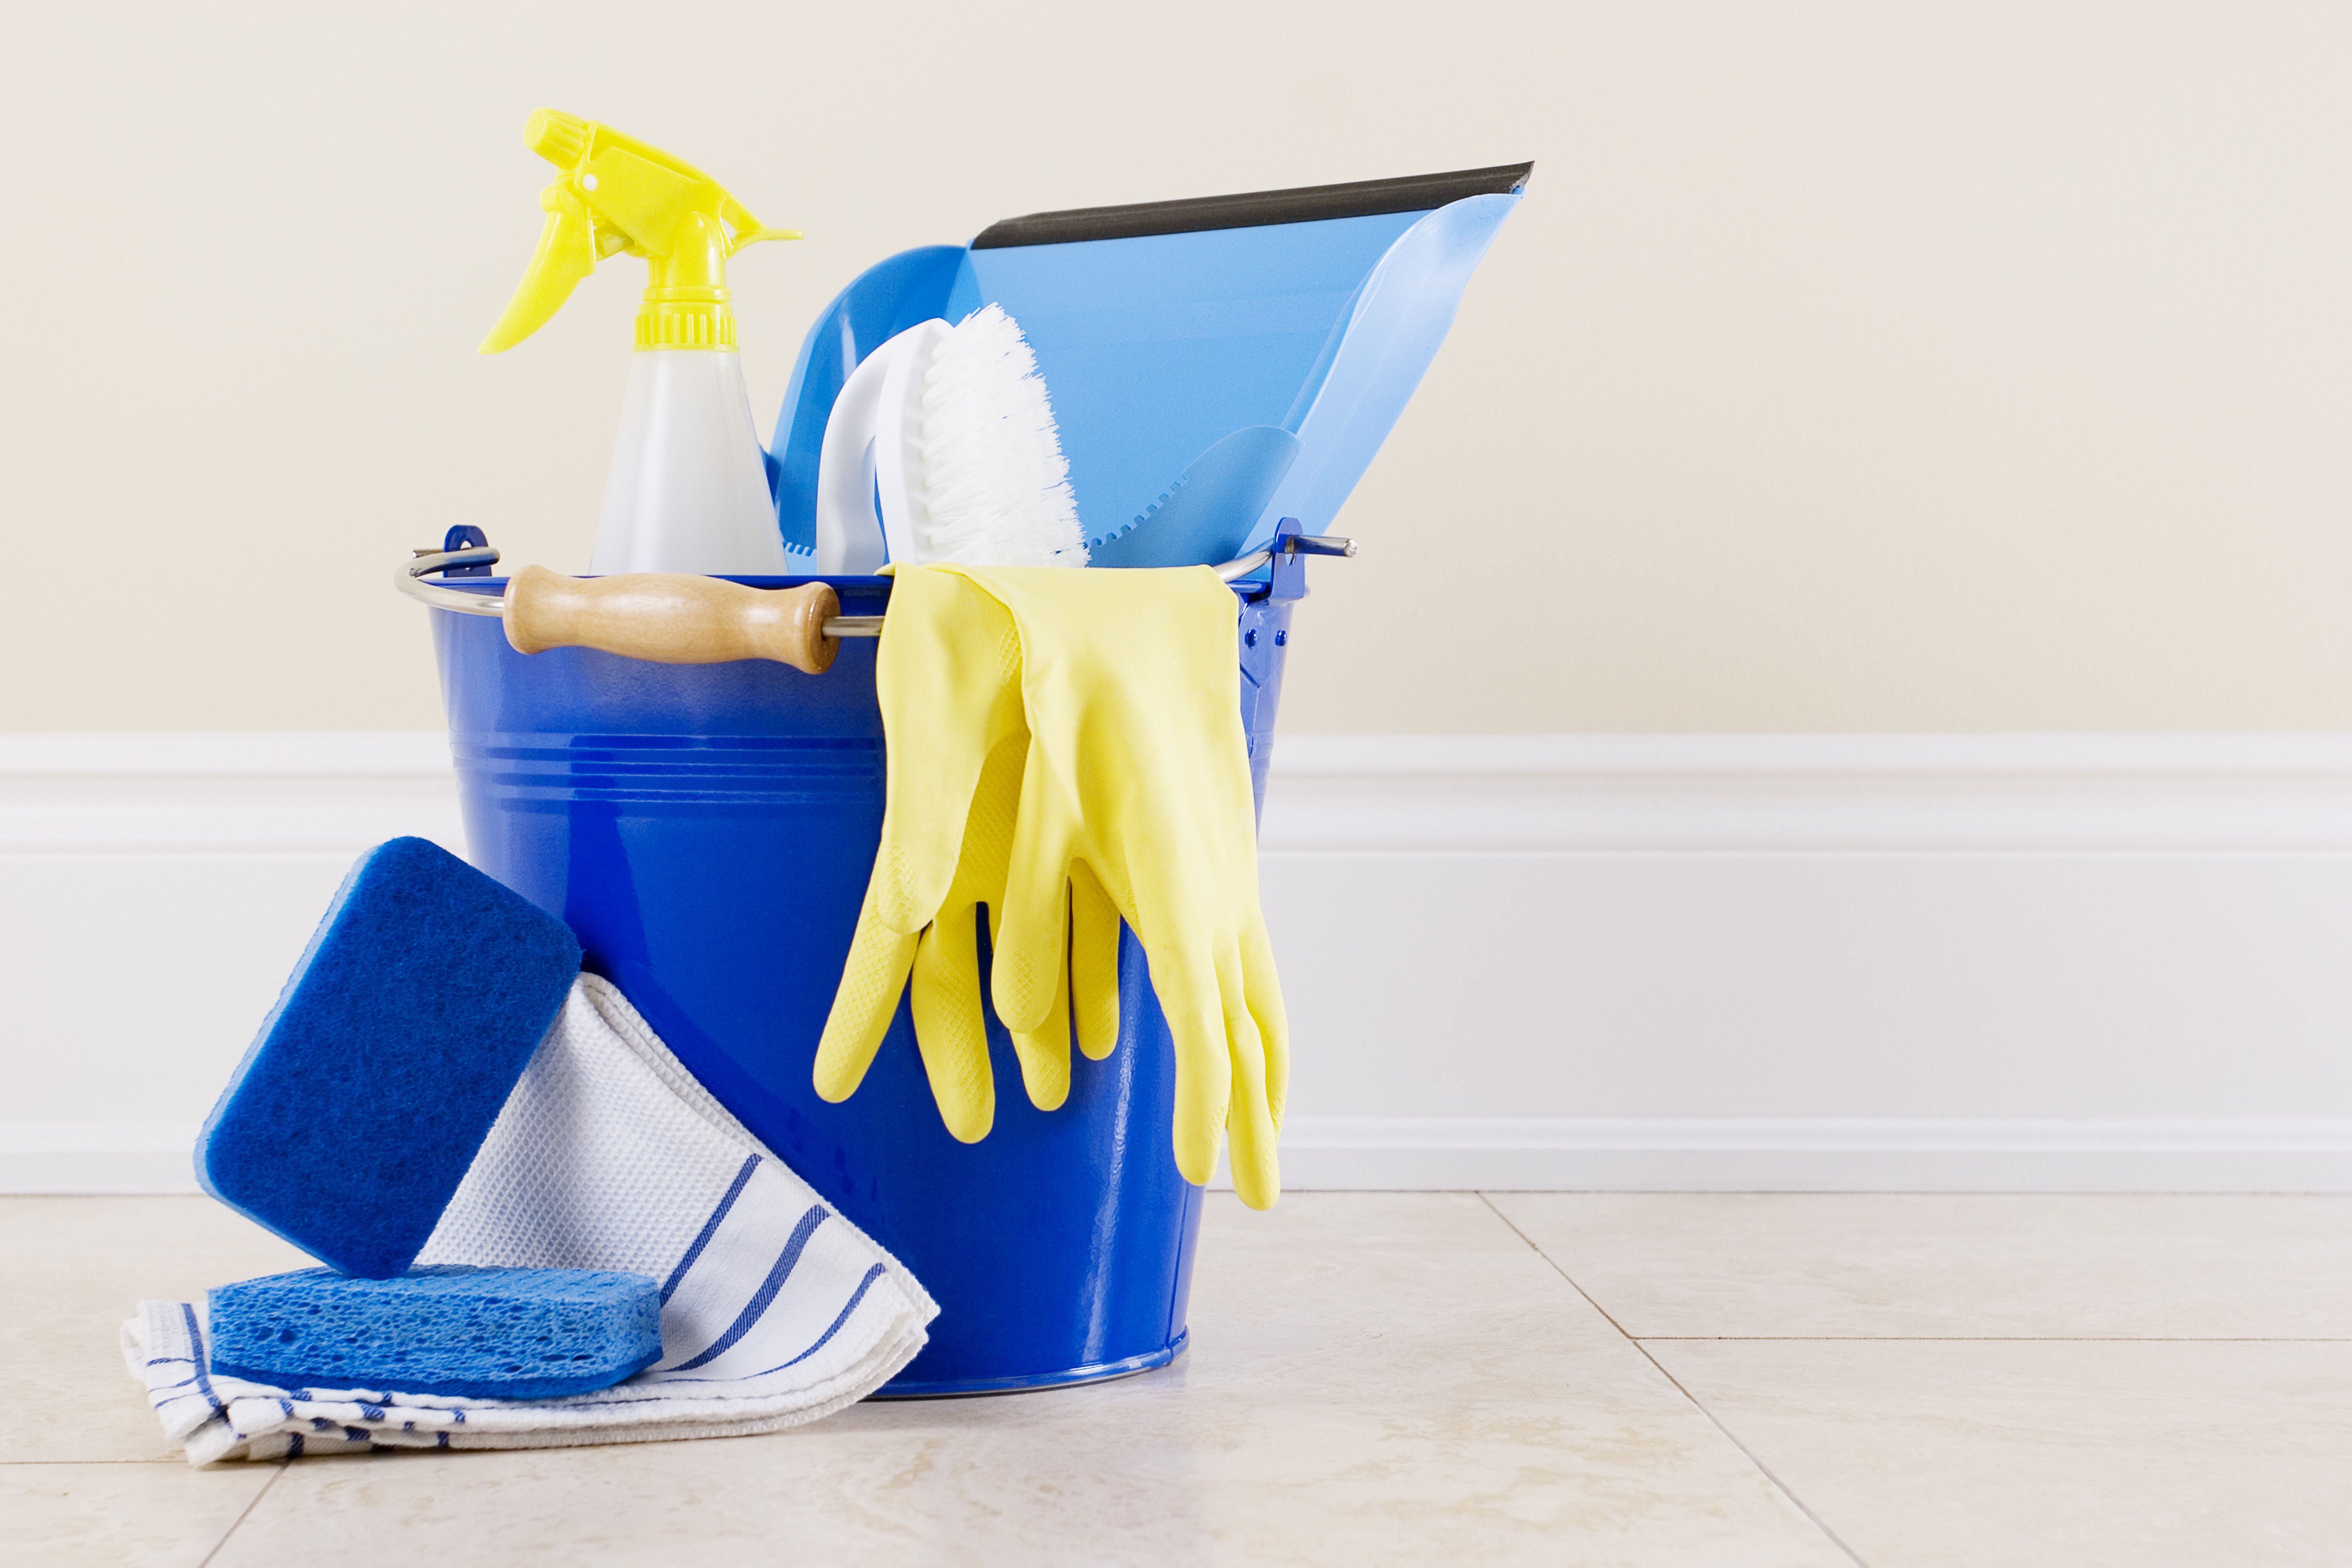 Home Deep Cleaning vsRegular Cleaning: What's the Difference? – The Urban  Guide